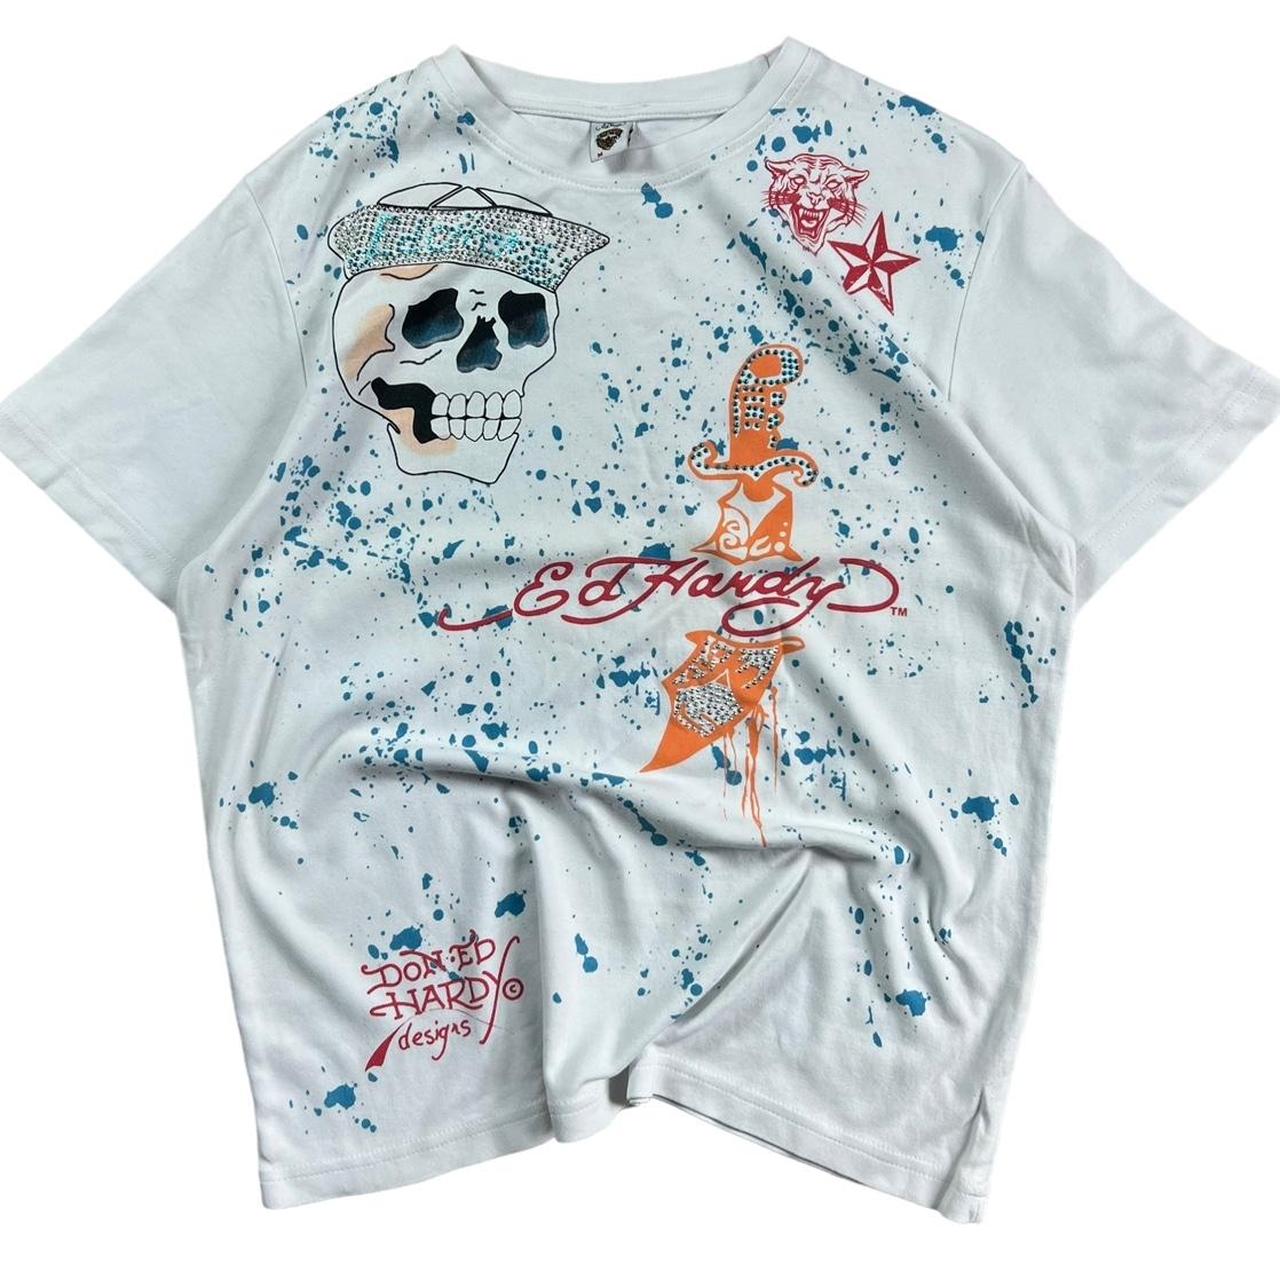 ED HARDY EDGY T-SHIRT JERSEY SKATER CYBER Y2K 2000S